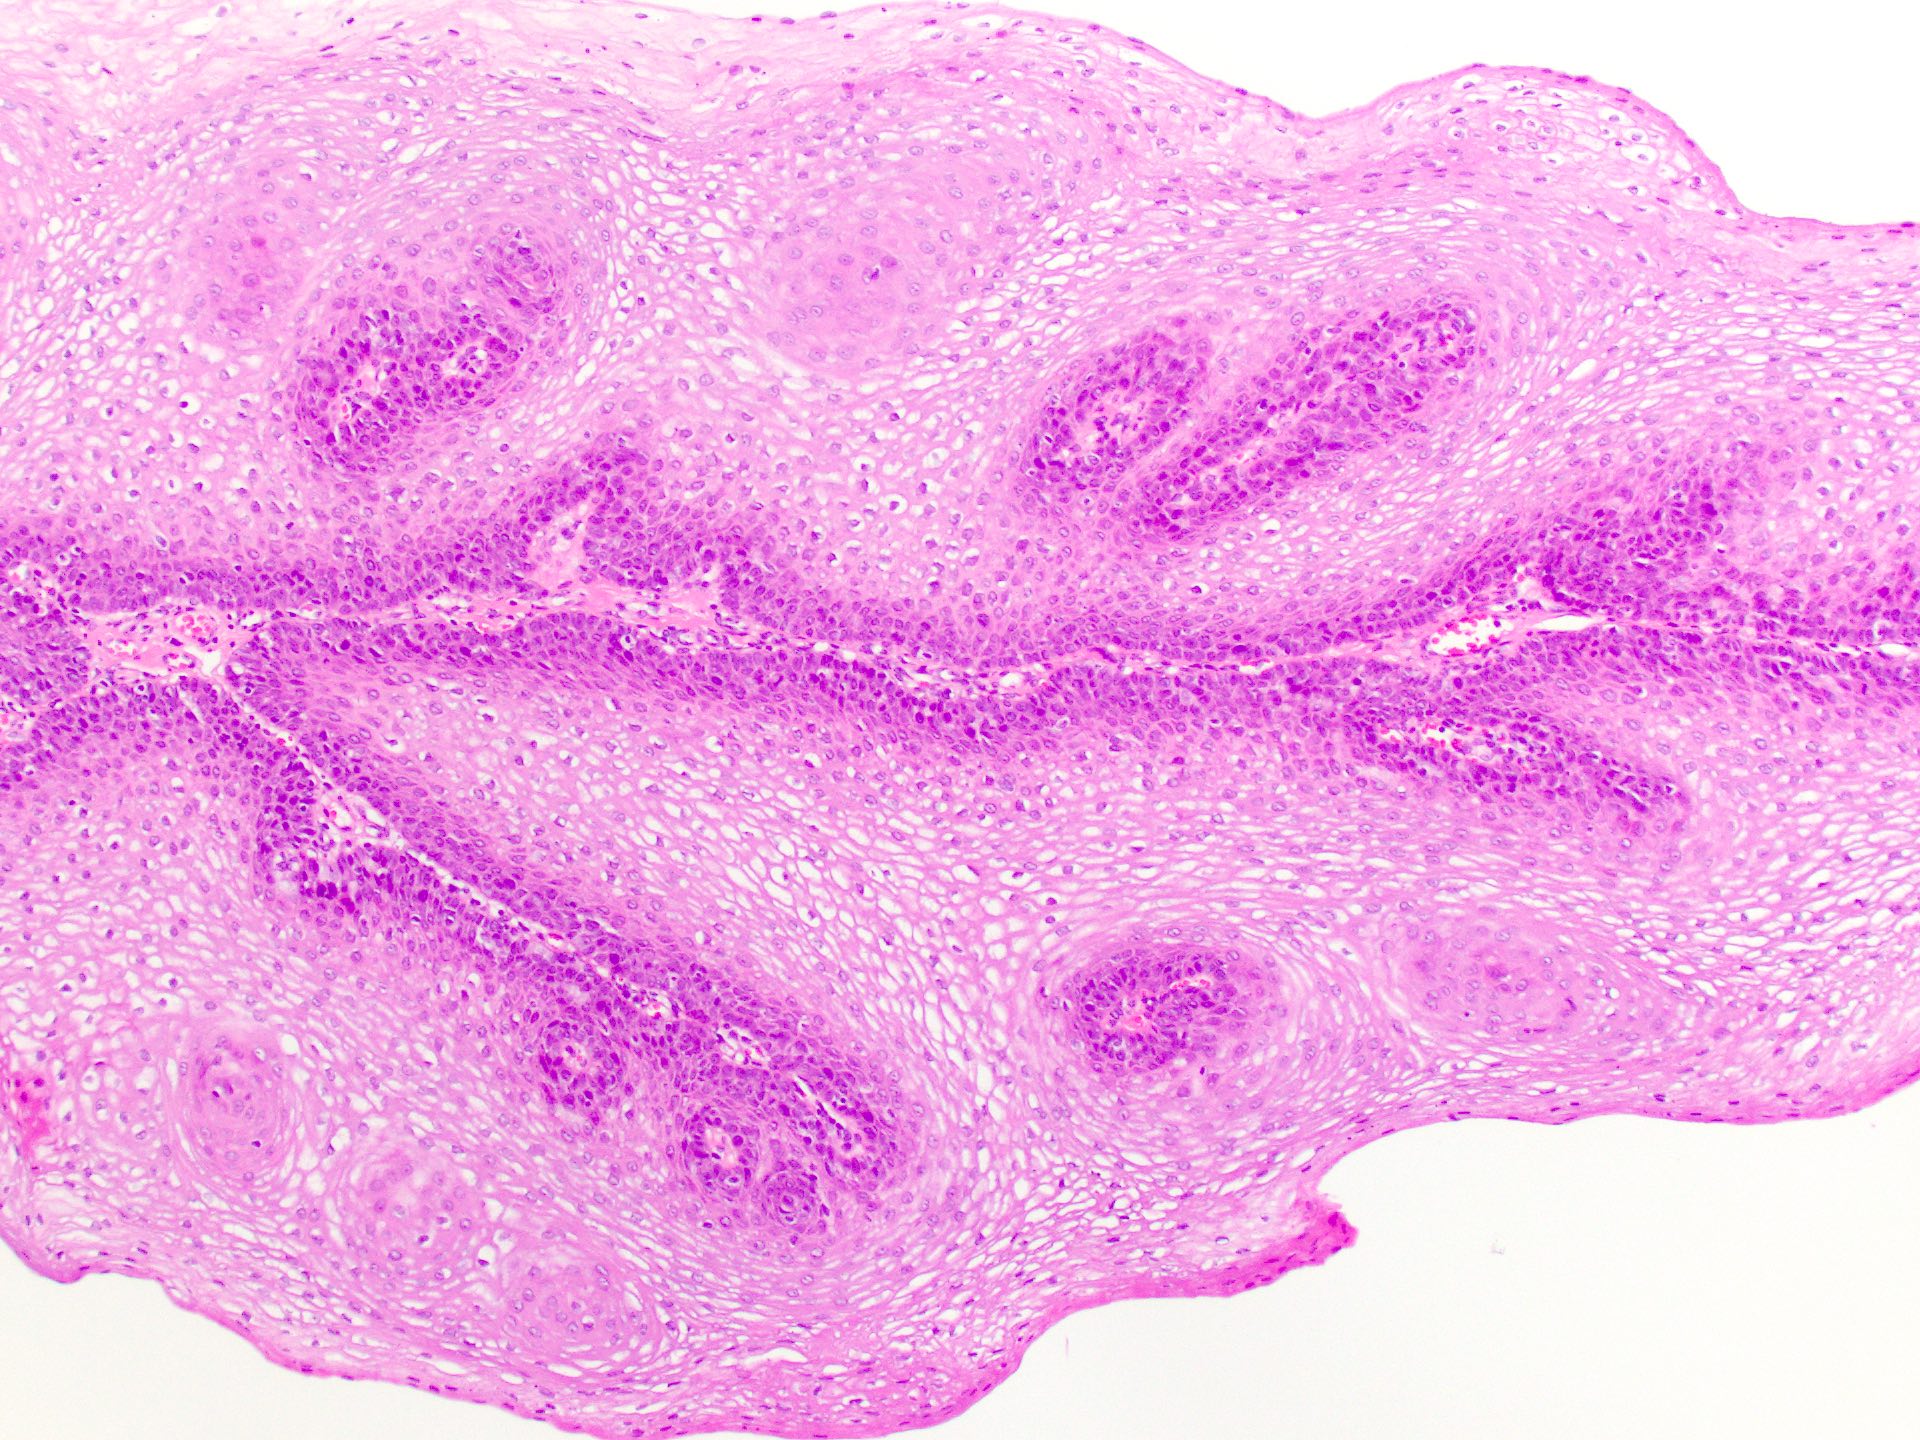 squamous papilloma path outlines